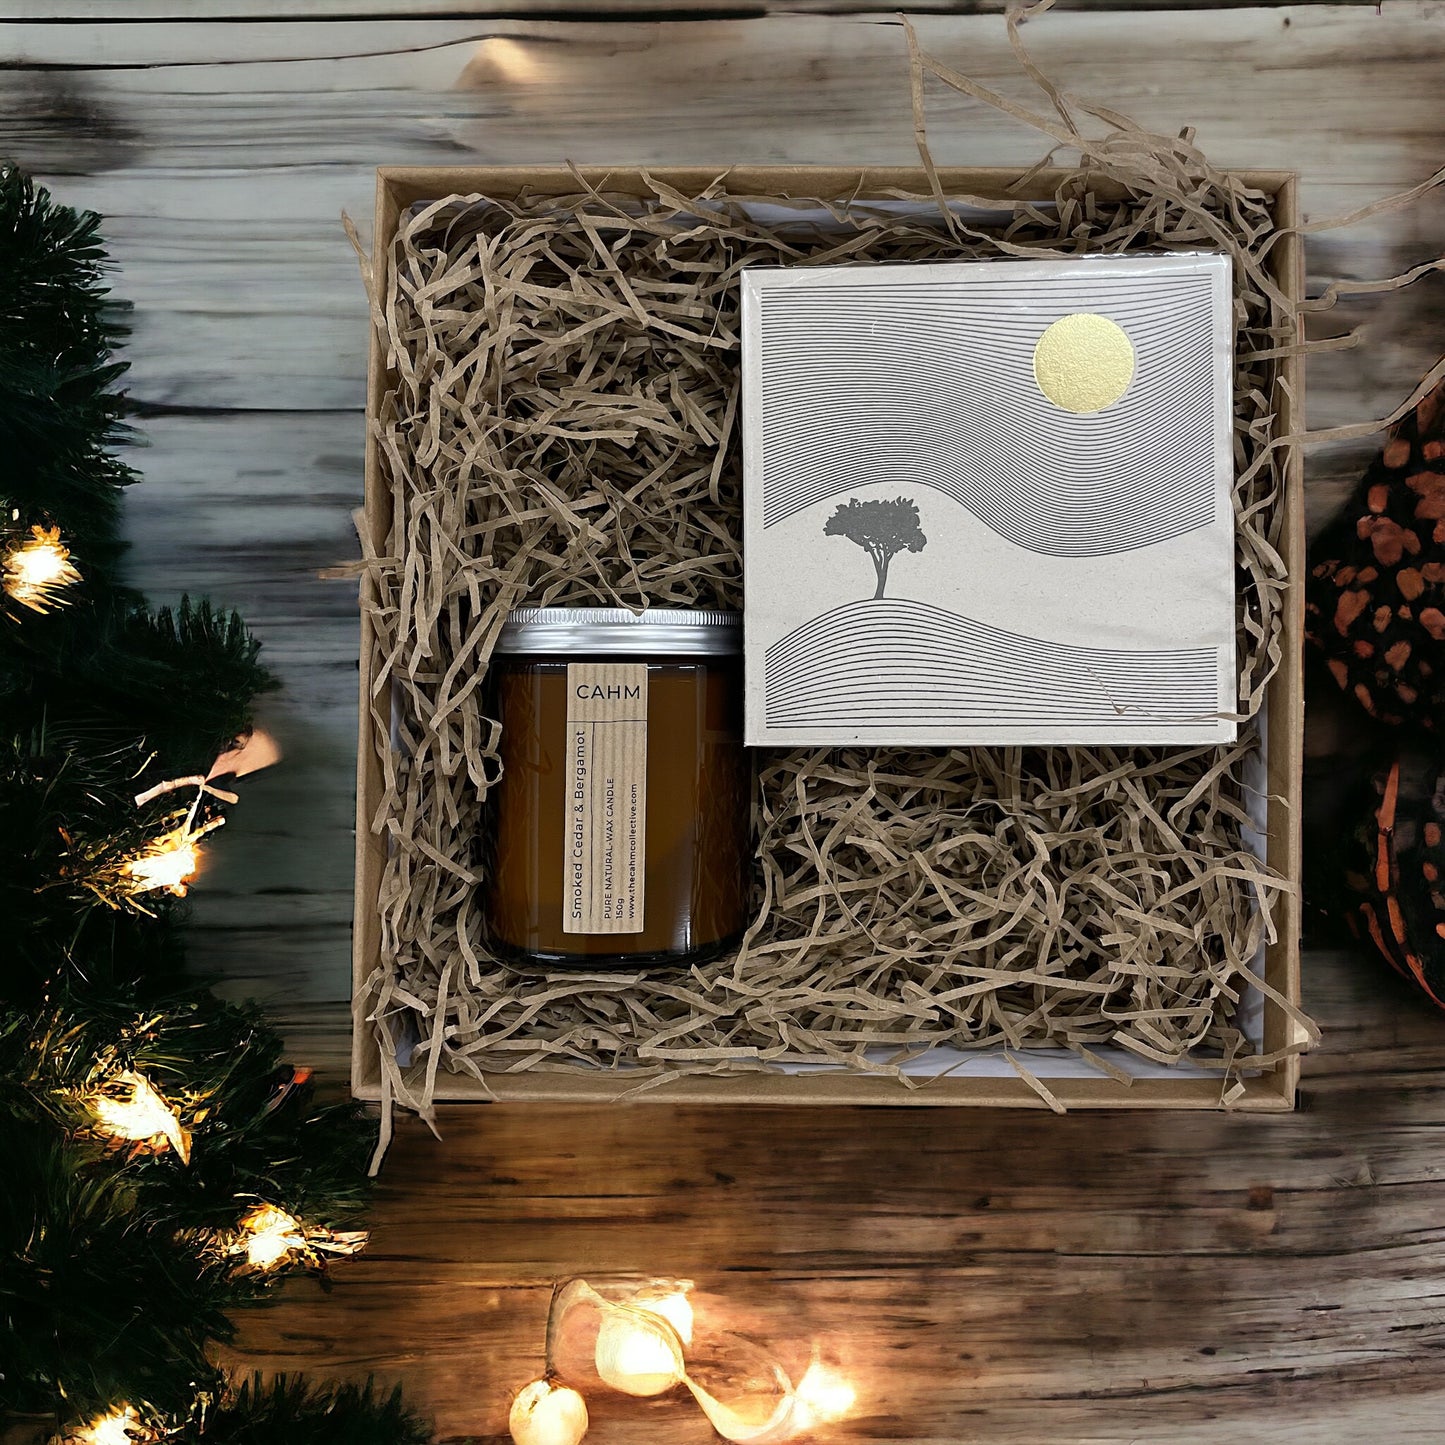 Candle and Landscape Matches Gift Set